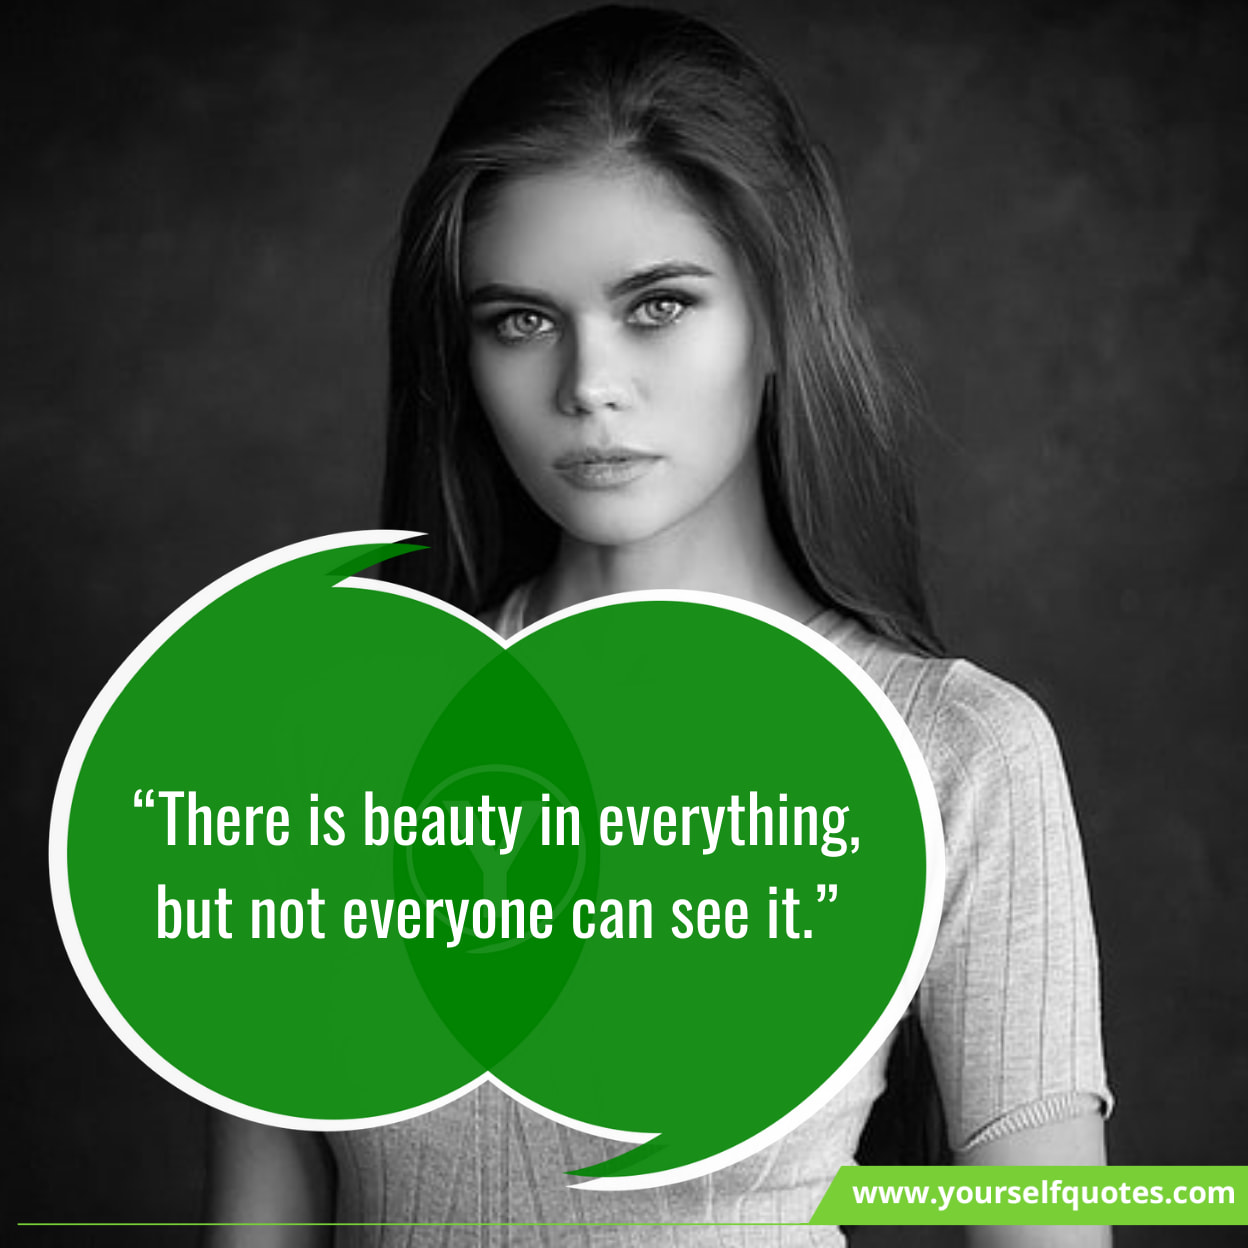 Best Beautiful Quotes On Beauty